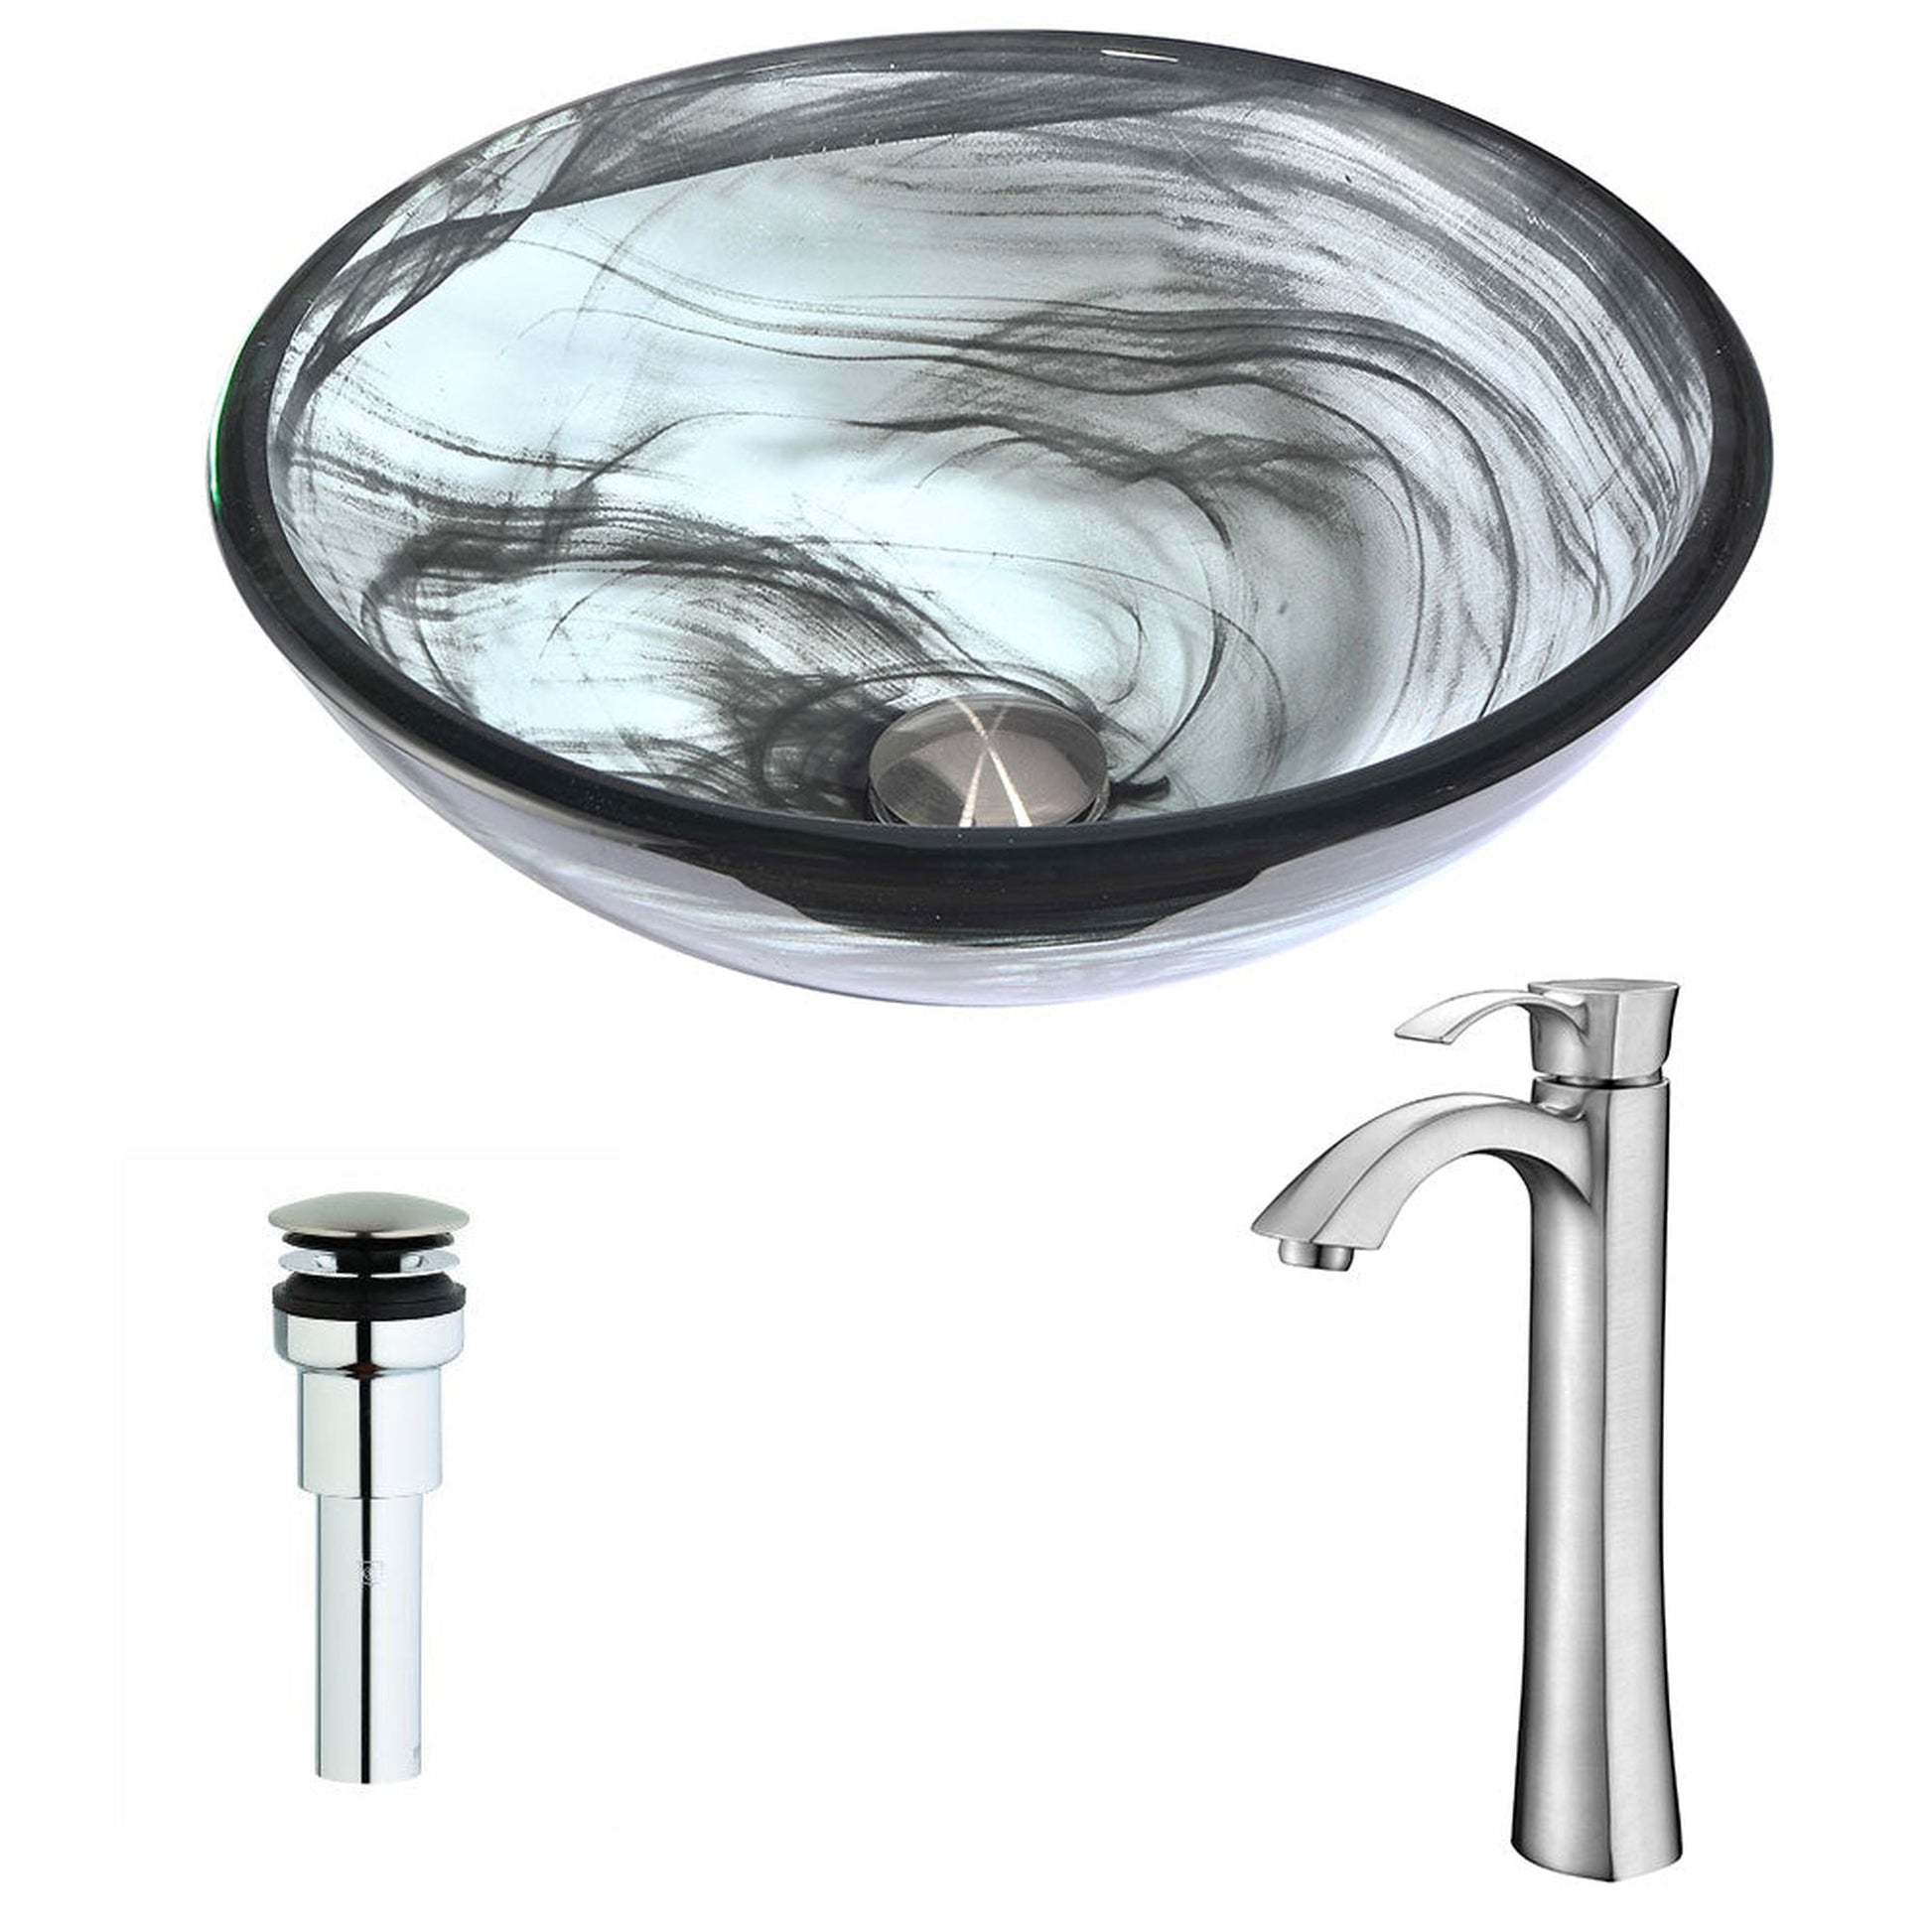 ANZZI Mezzo Series 17" x 17" Round Slumber Wisp Deco-Glass Vessel Sink With Polished Chrome Pop-Up Drain and Brushed Nickel Harmony Faucet